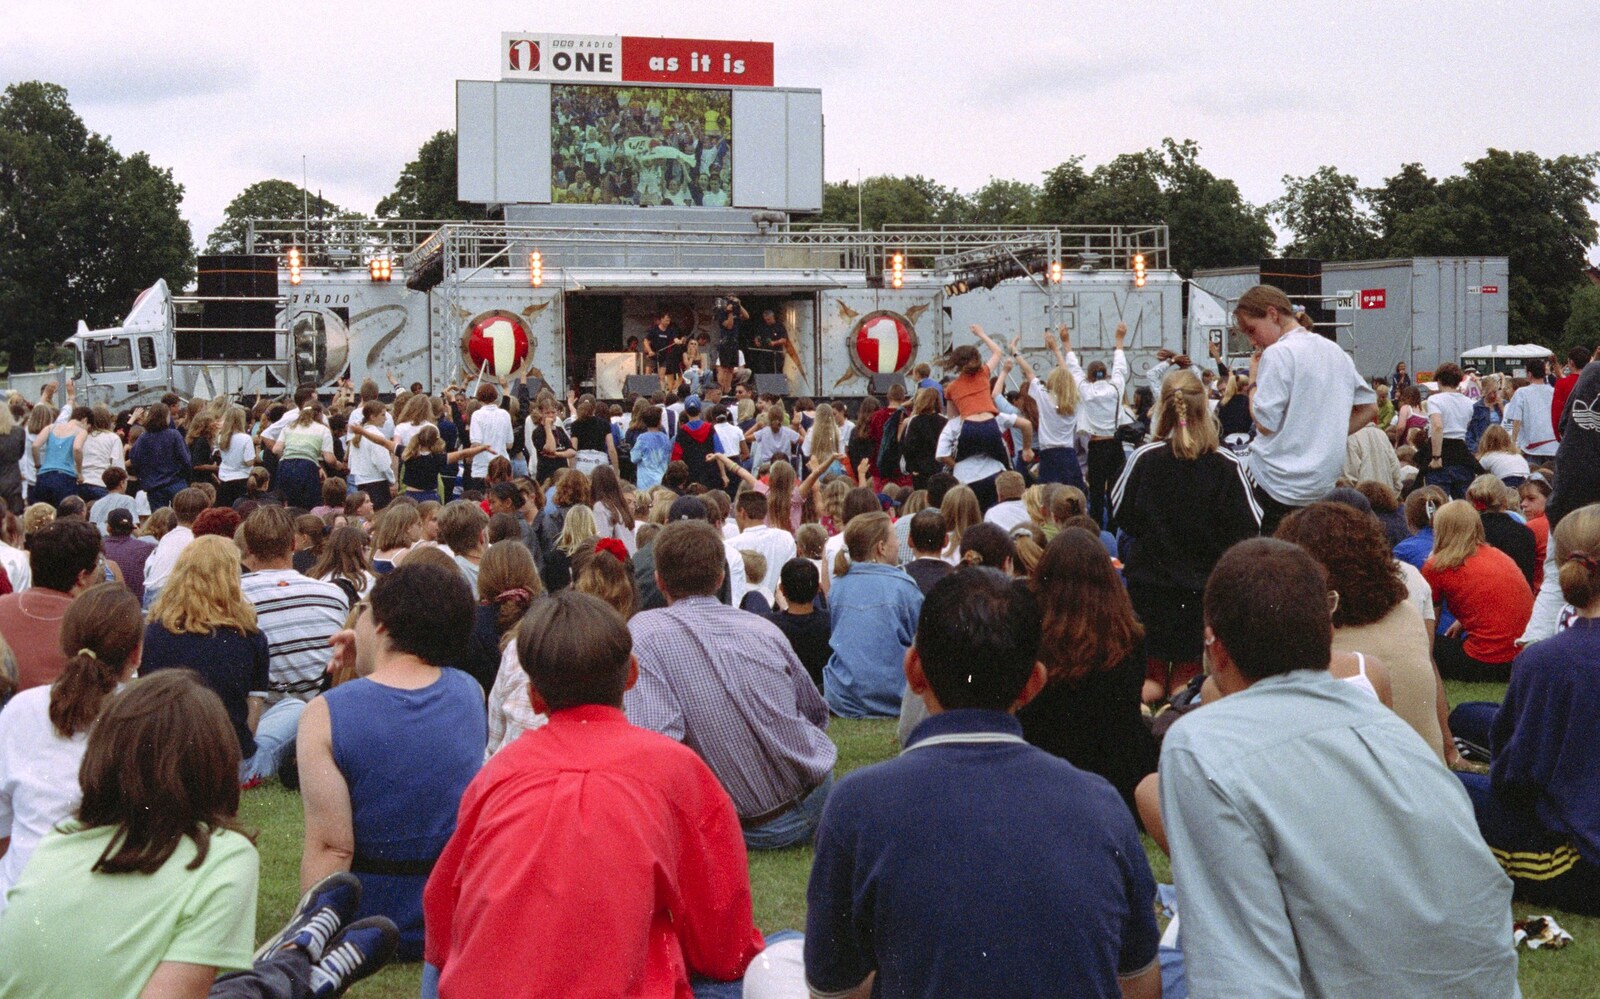 Andrew's CISU Party and the Radio One Roadshow, Ipswich, Suffolk - 18th June 1997: The roadshow stage